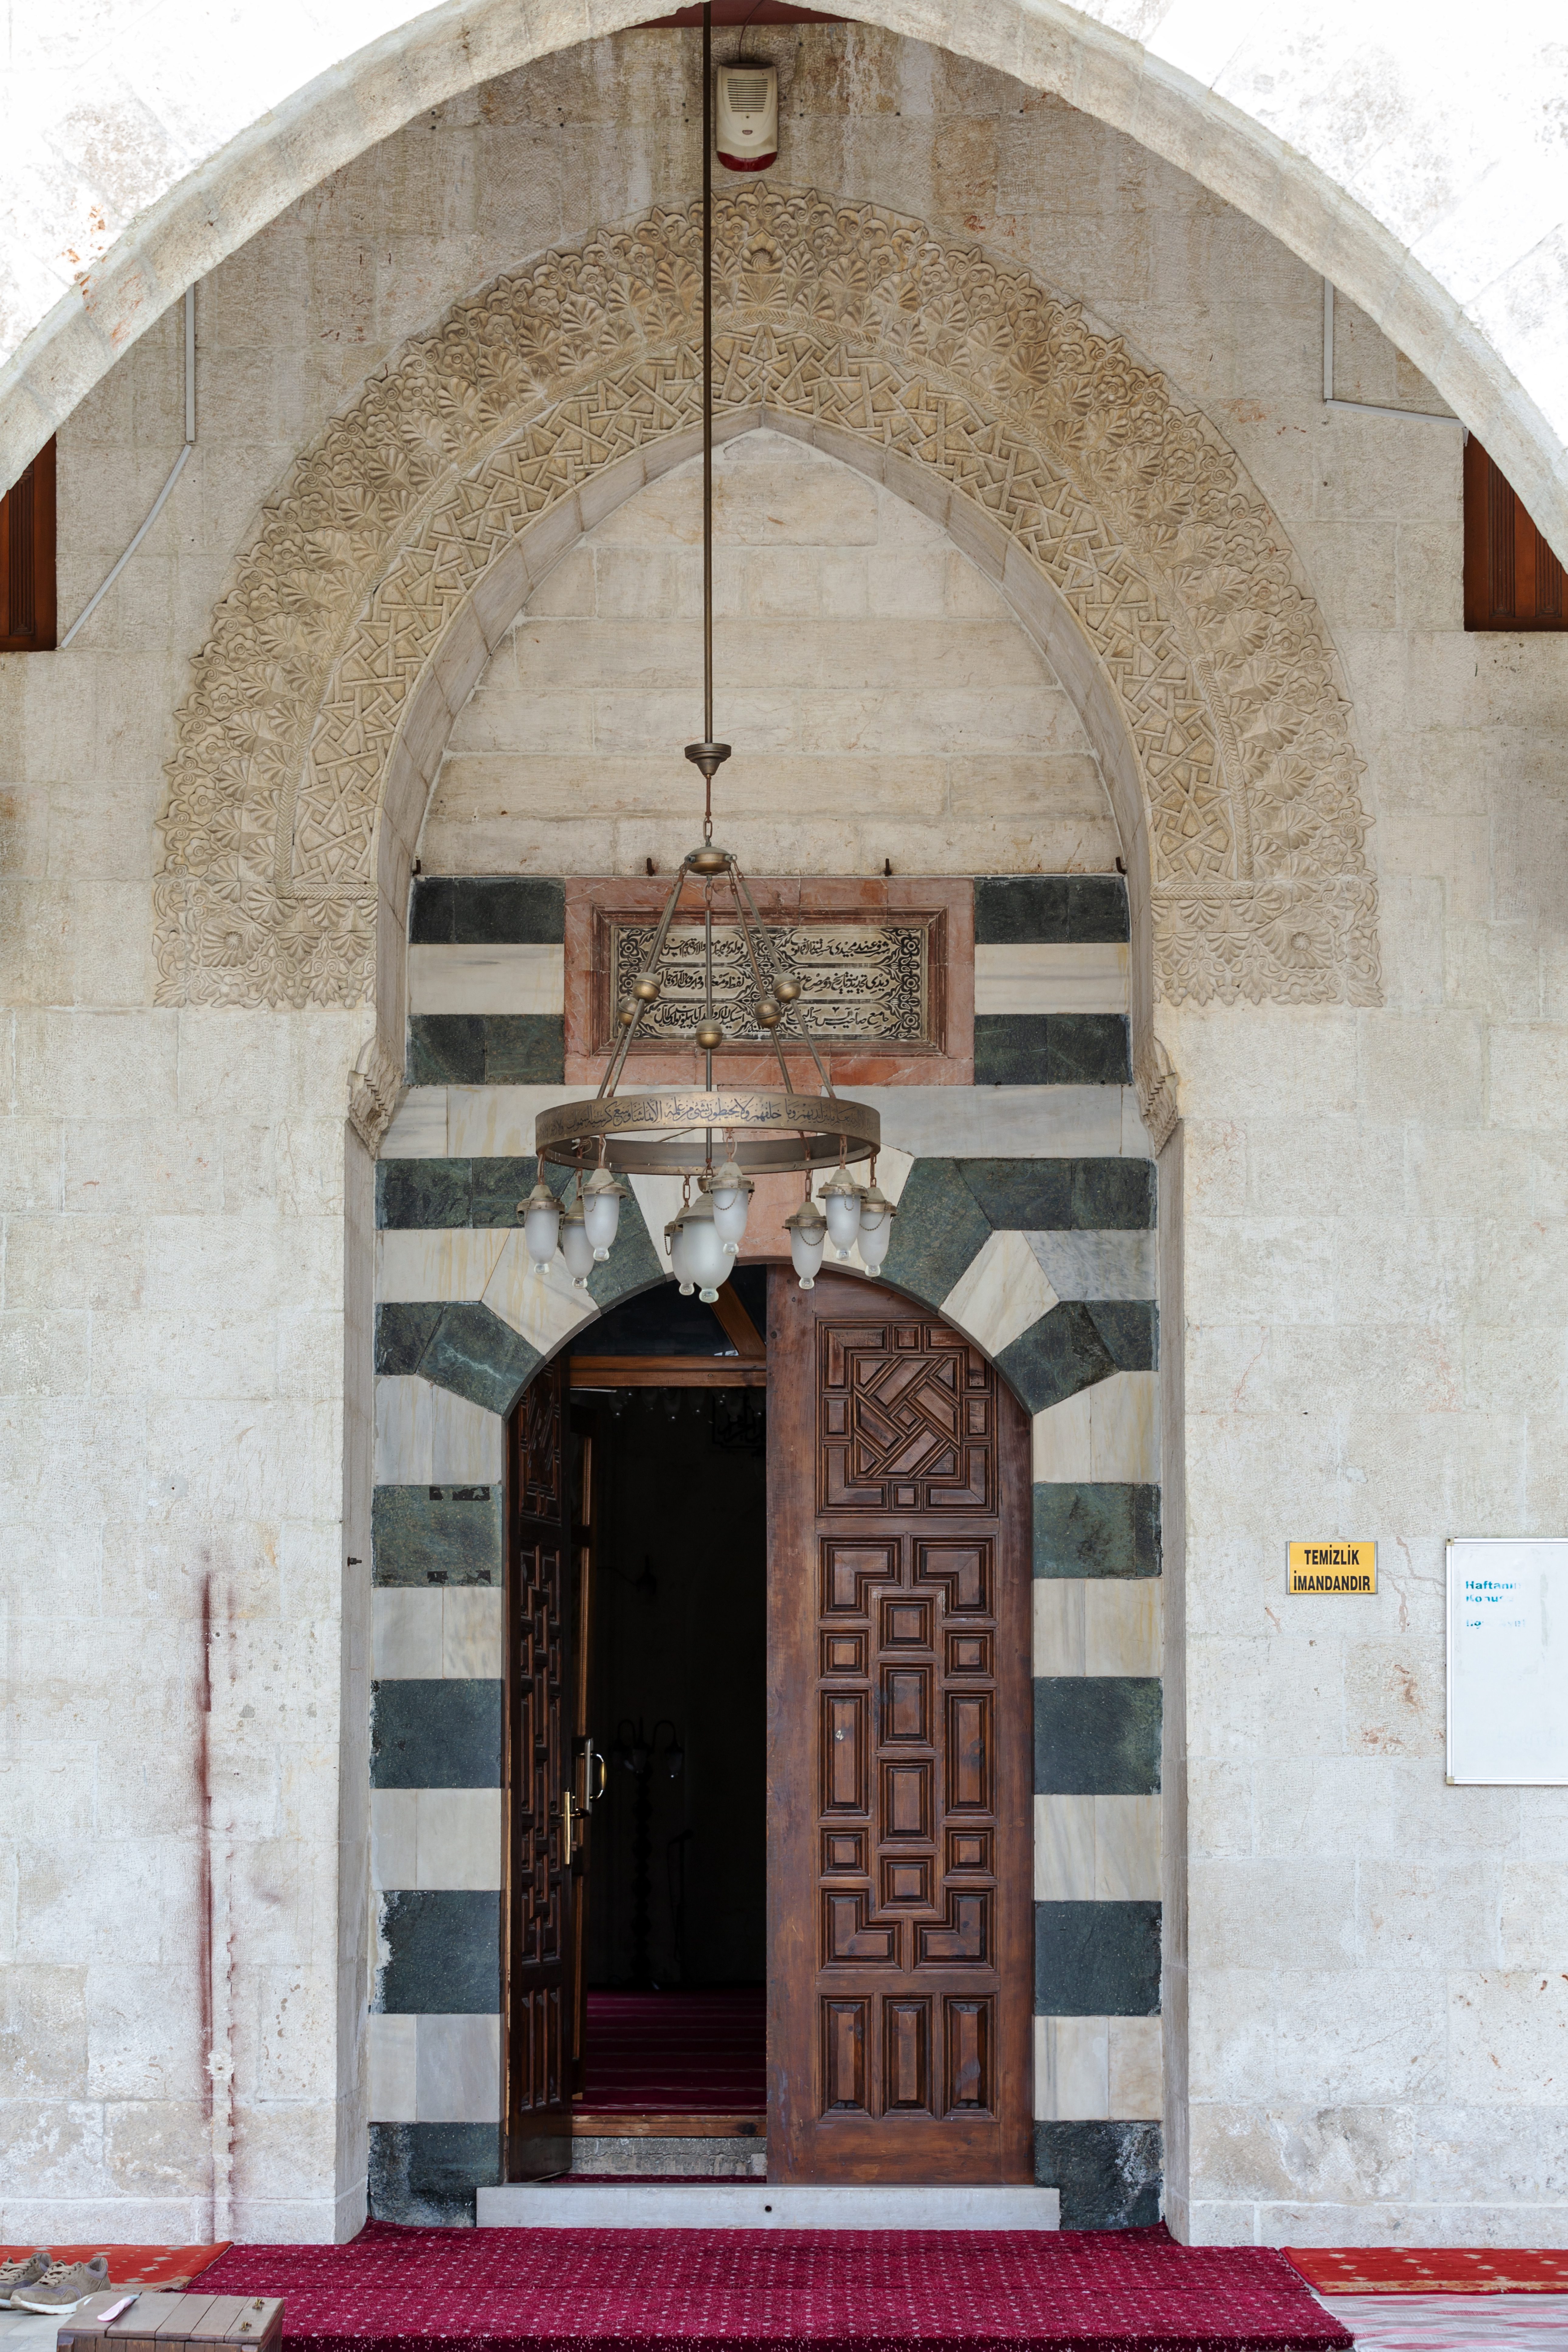 <p>View of the entrance with chandelier, inscription and carved wood door</p>